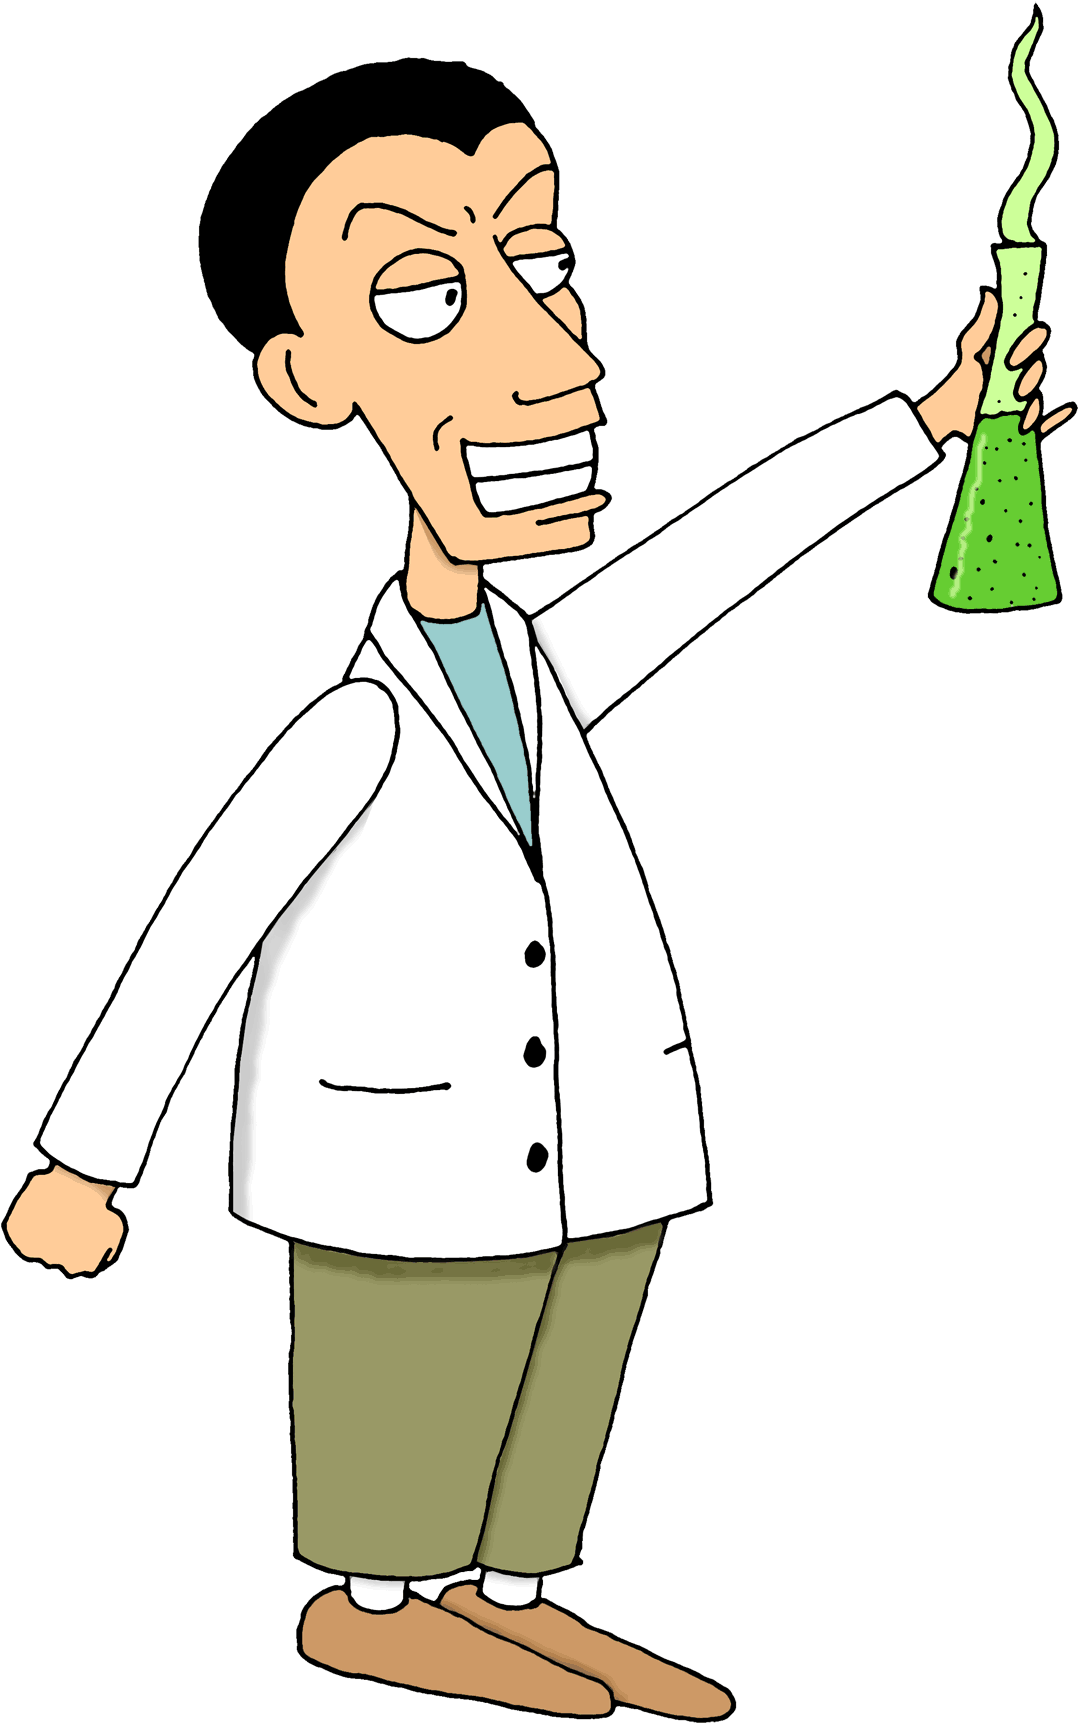 Animated Scientist Holding Flask PNG image